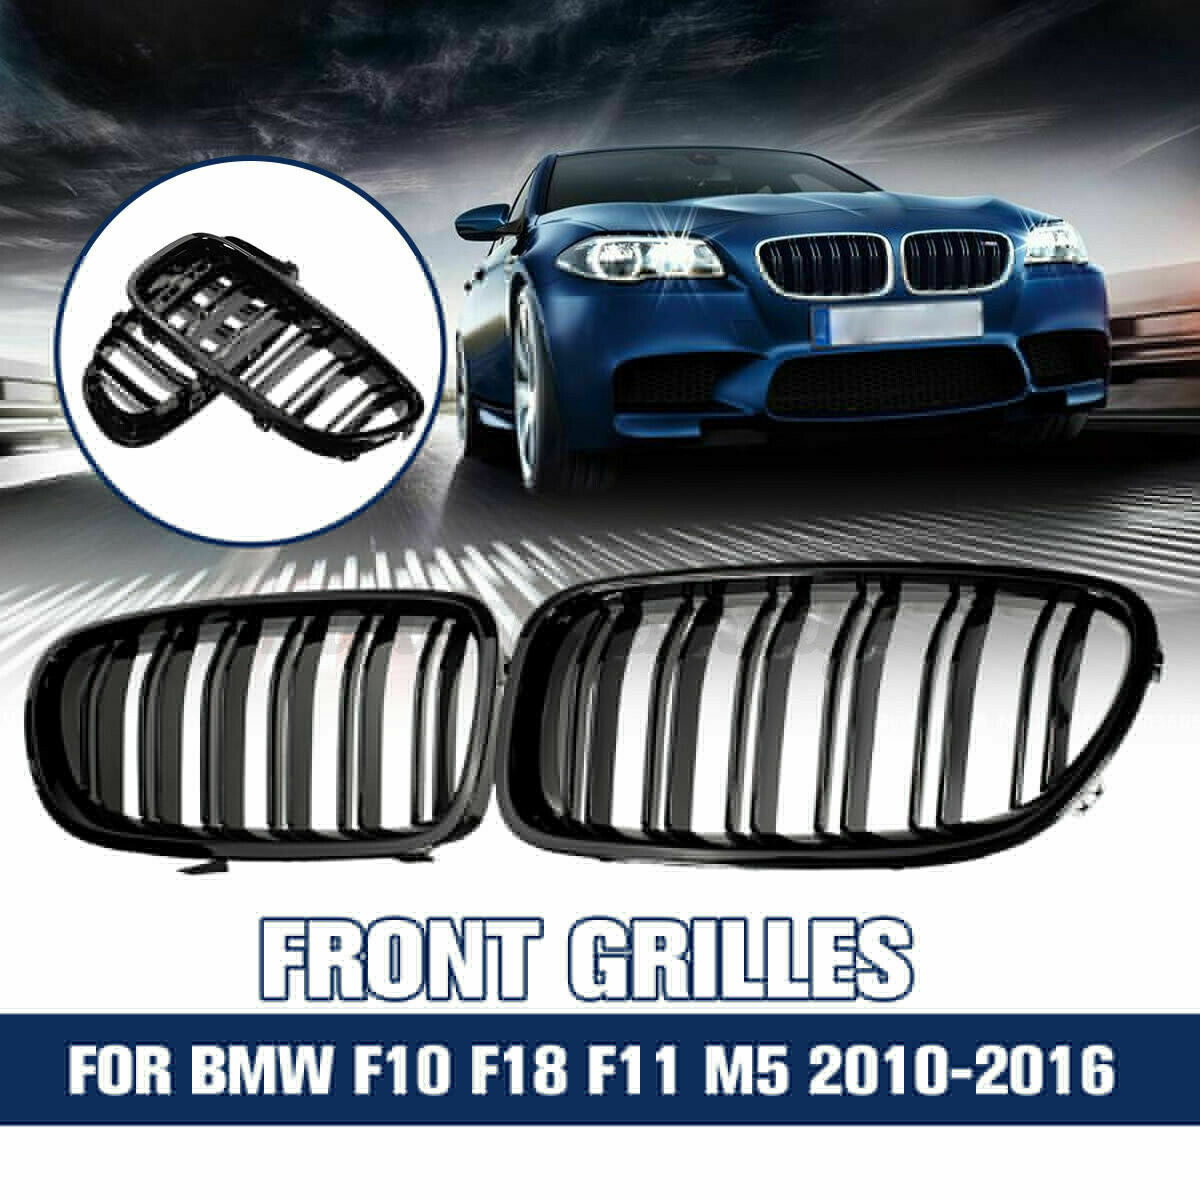 1PAIR FRONT KIDNEY GRILLES GRILL GLOSS BLACK FOR BMW F10 F18 F11 M5 2010-2016 UK